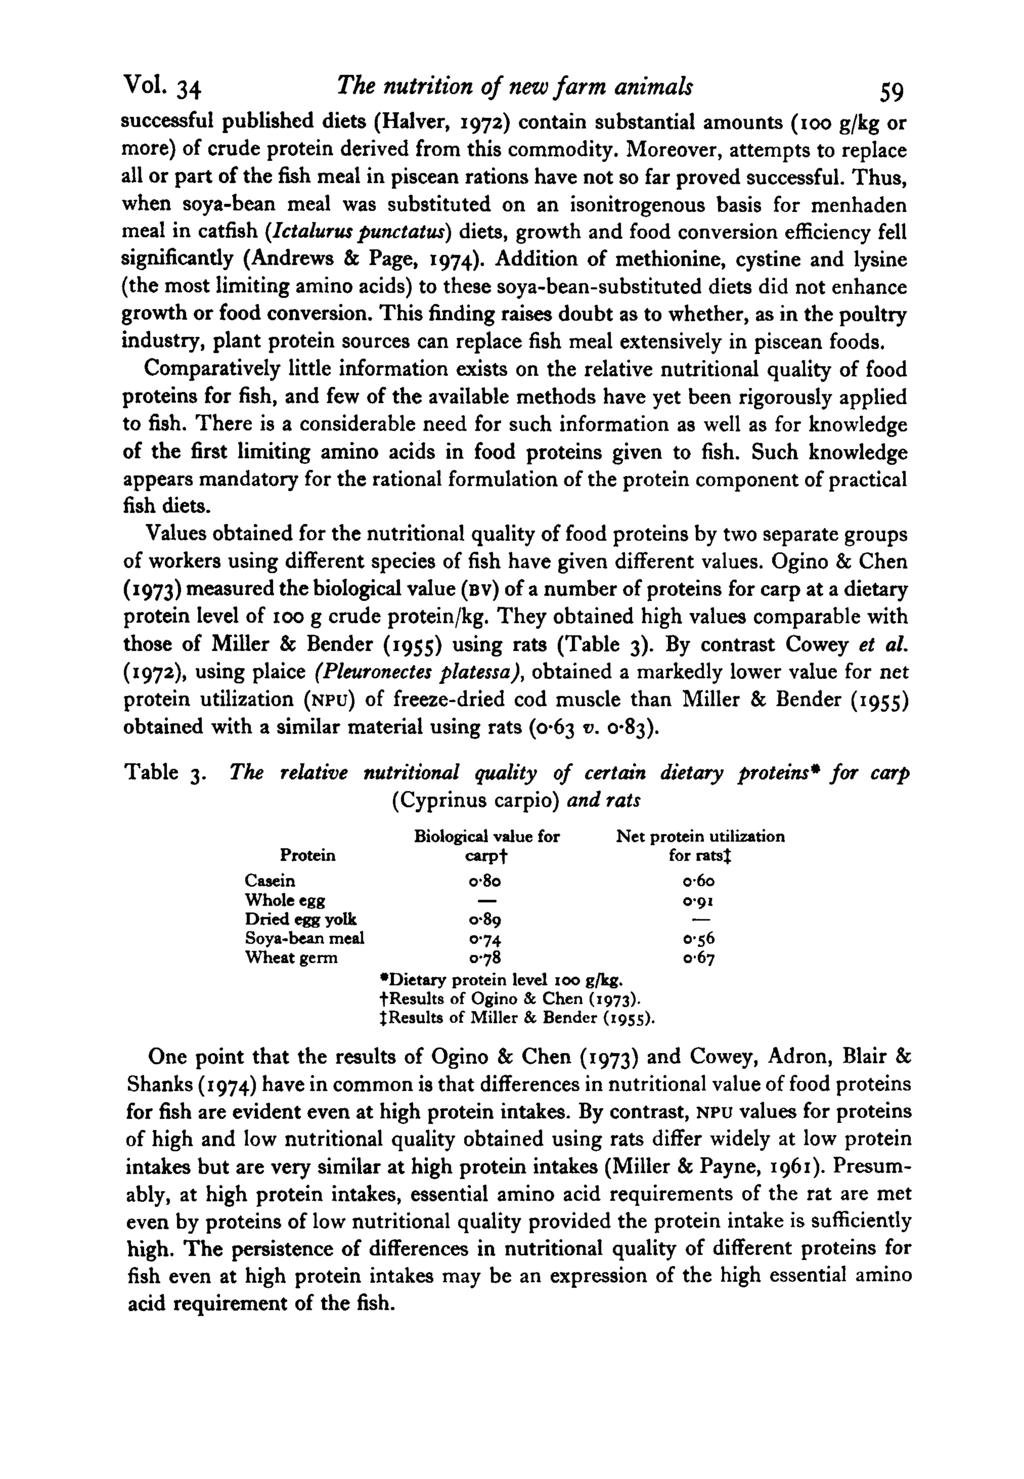 VOl. 34 The nutrition of new farm animals 59 successful published diets (Halver, 1972) contain substantial amounts (100 g/kg or more) of crude protein derived from this commodity.